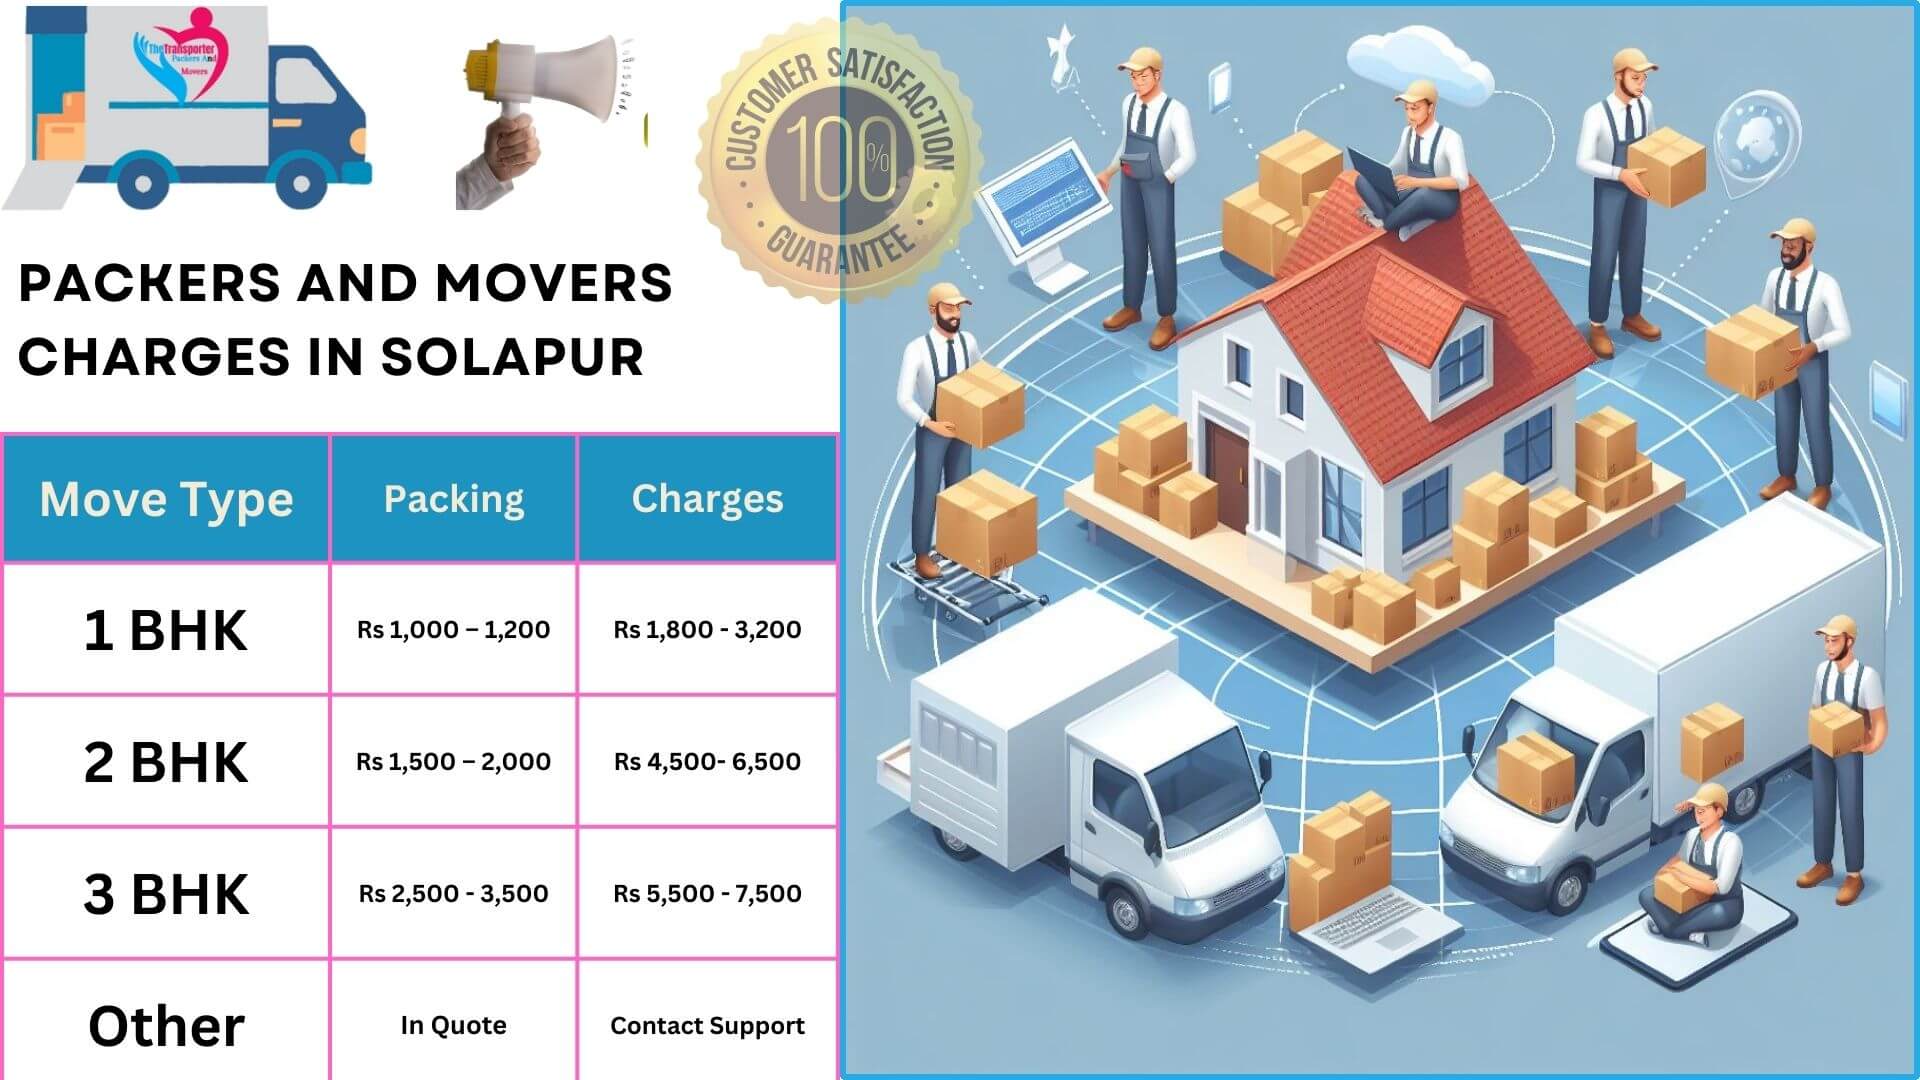 TheTransporter Packers and movers Charges list in Solapur 